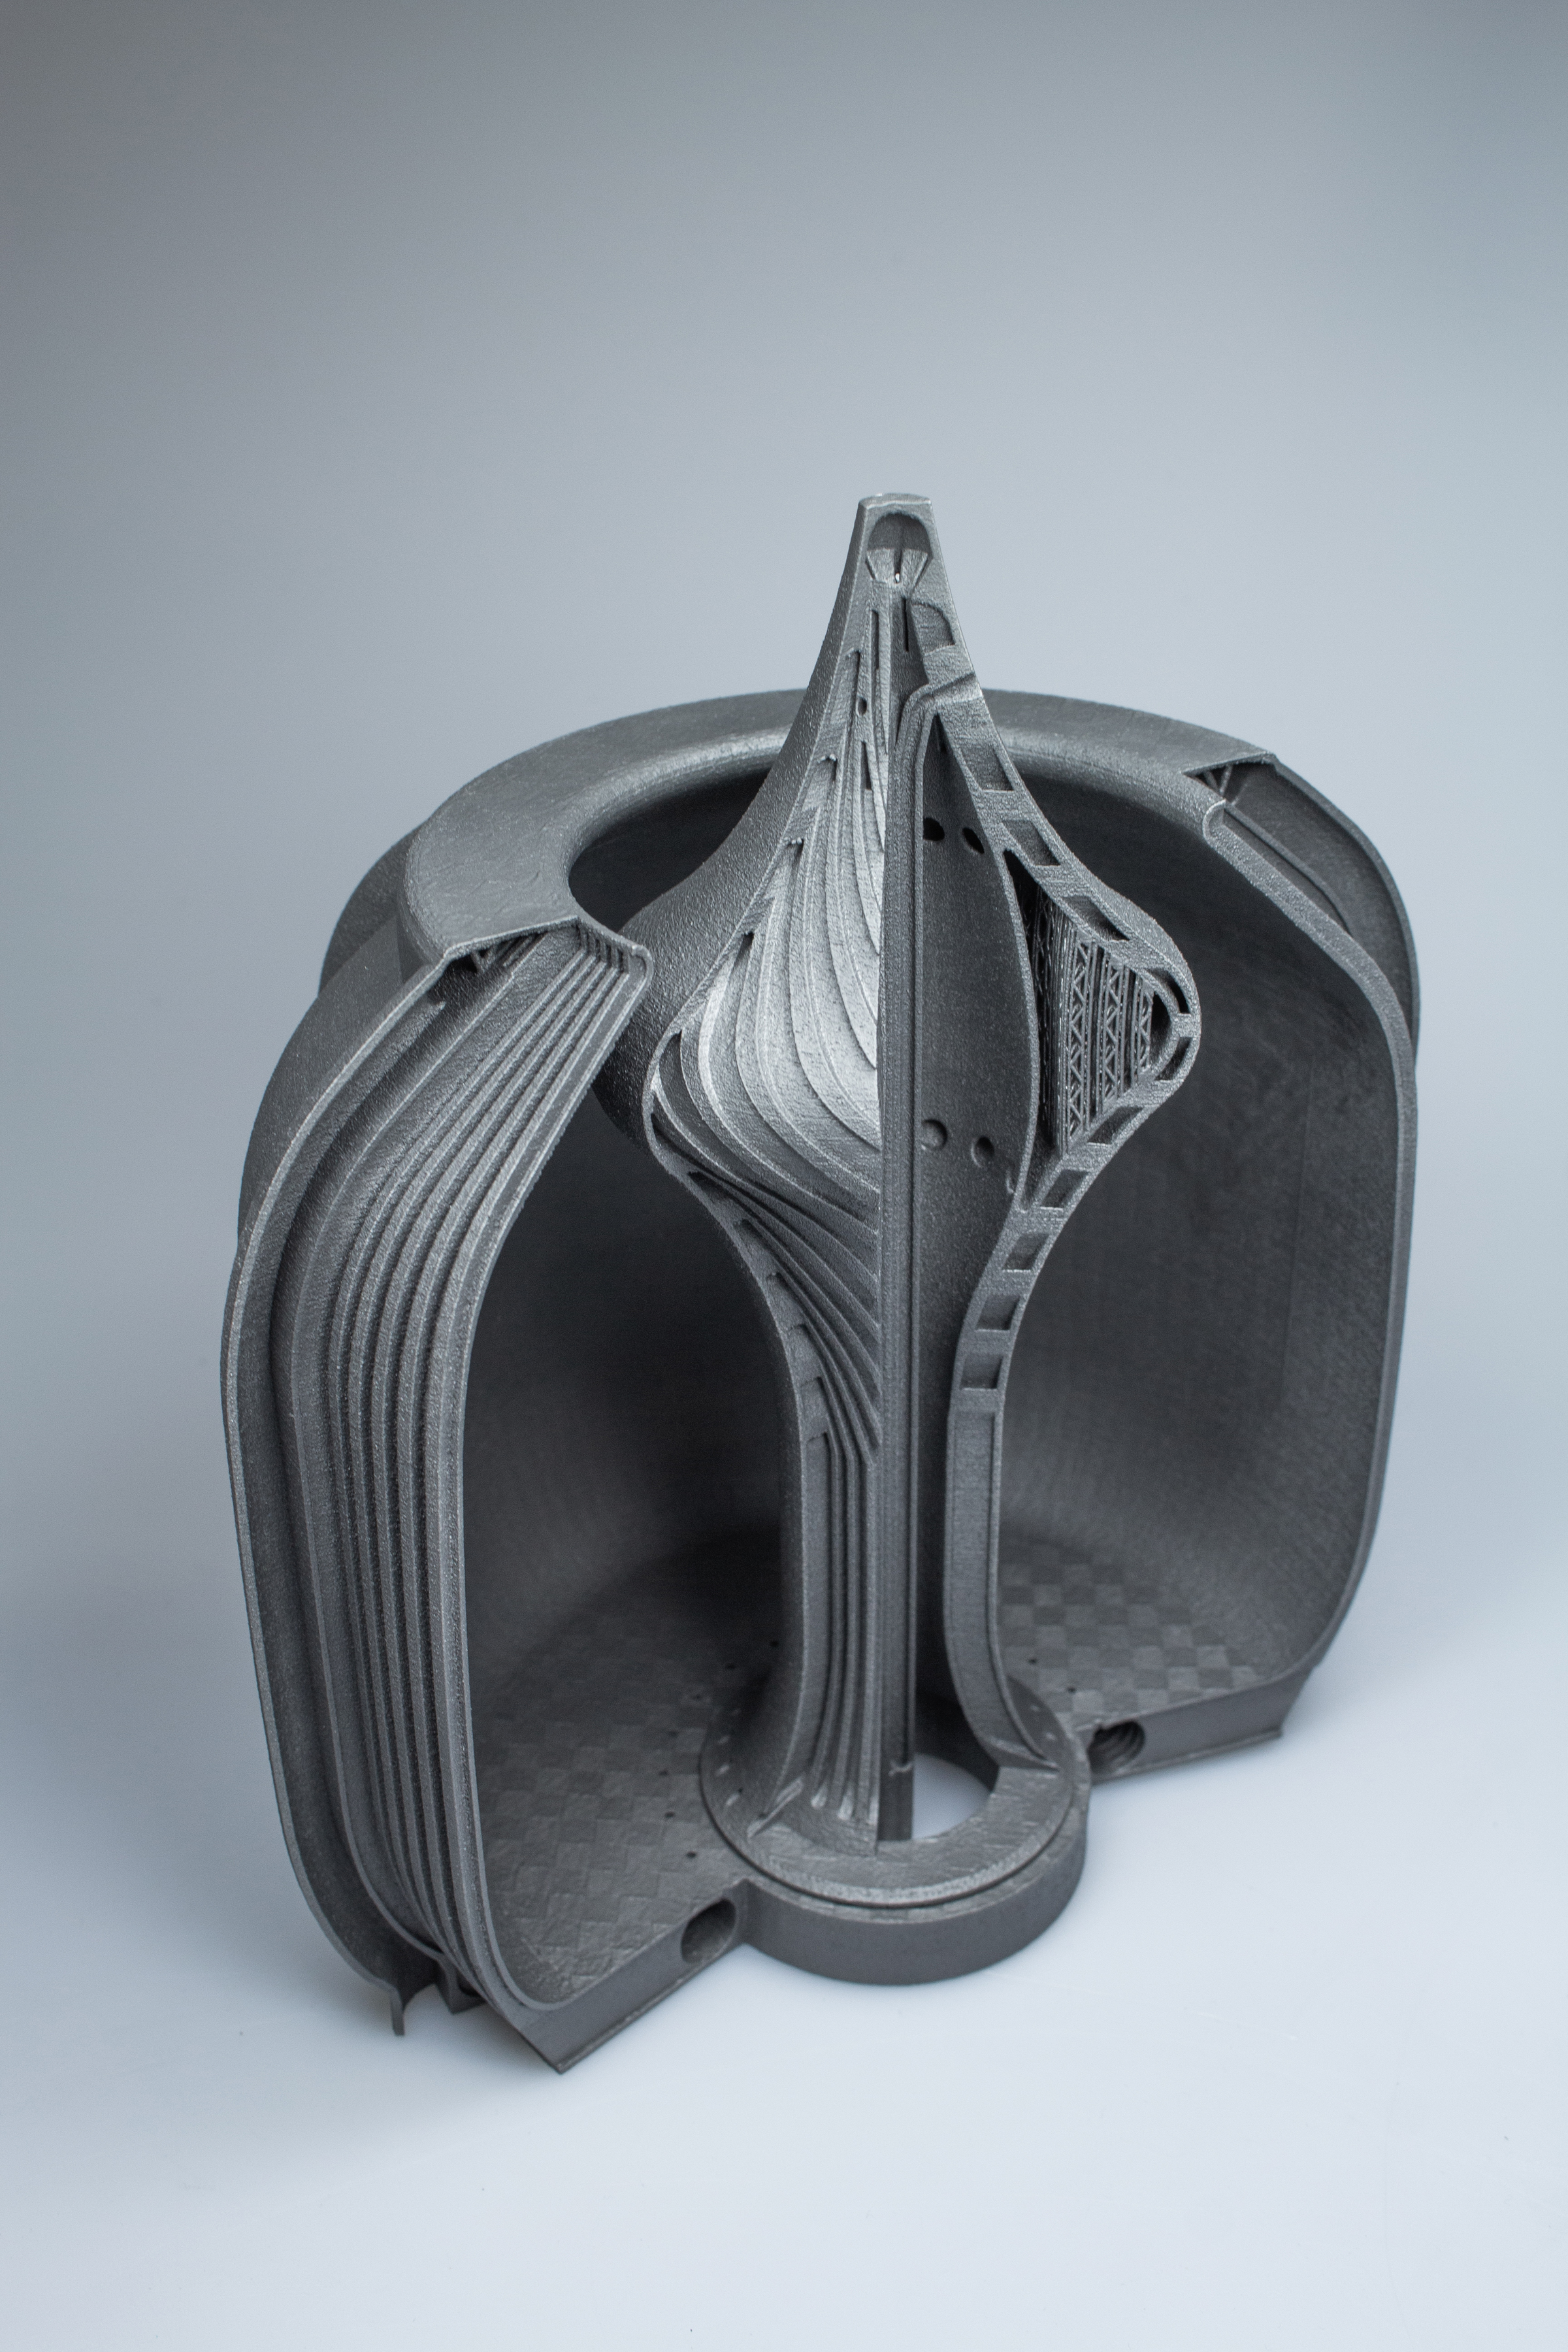 A design demonstrator for an additively manufactured aerospike nozzle.